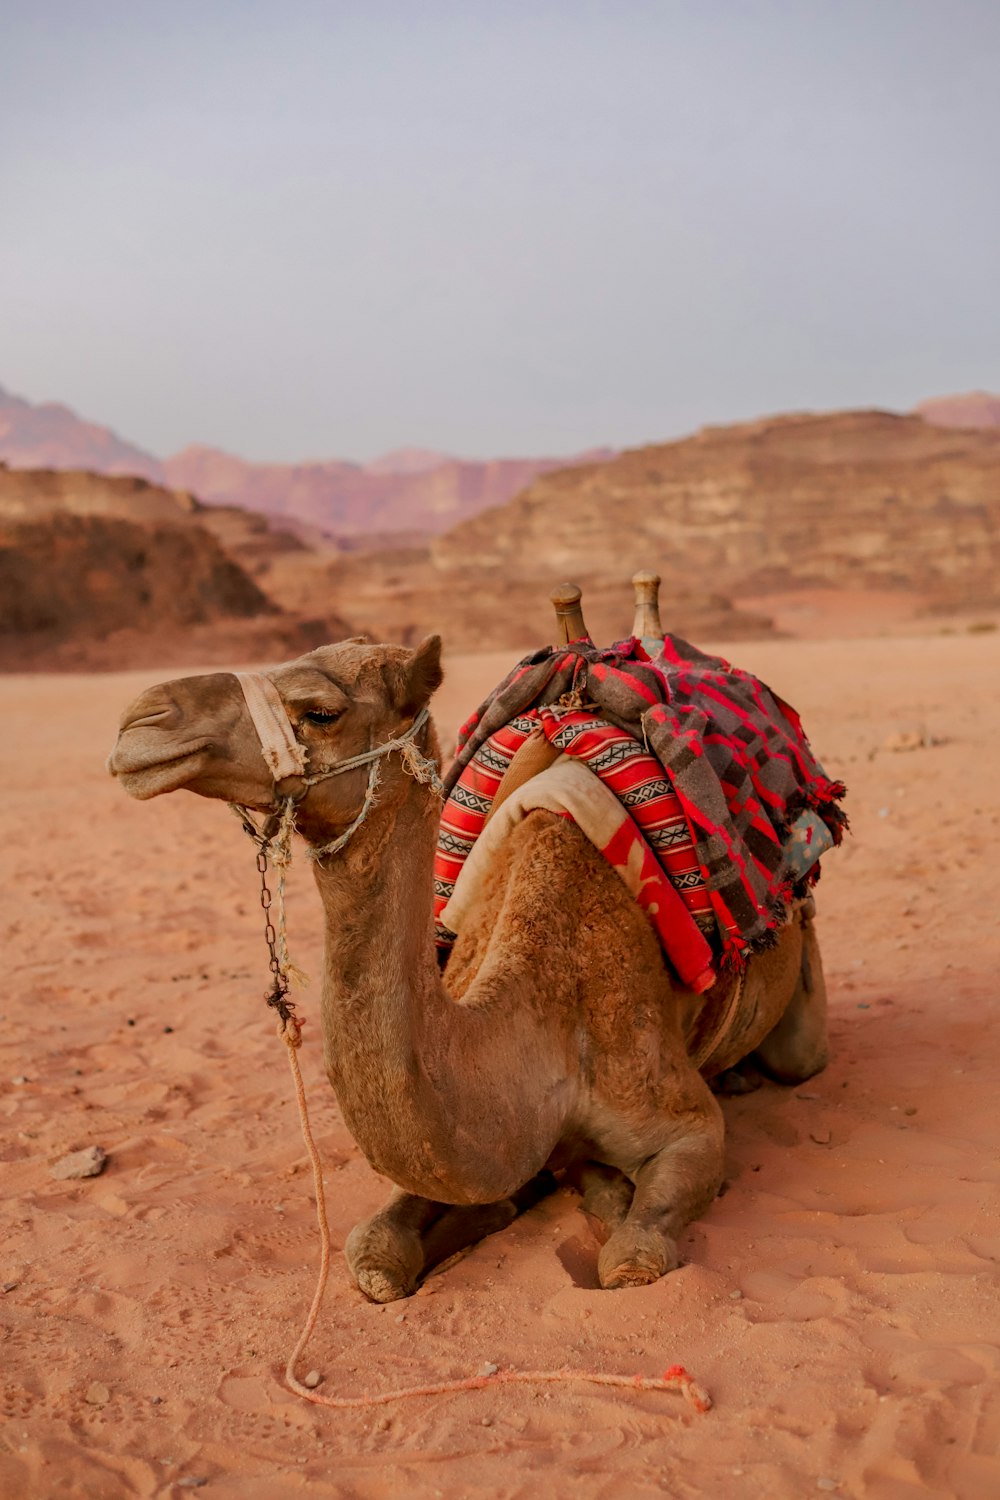 a camel with a saddle on its back in the desert